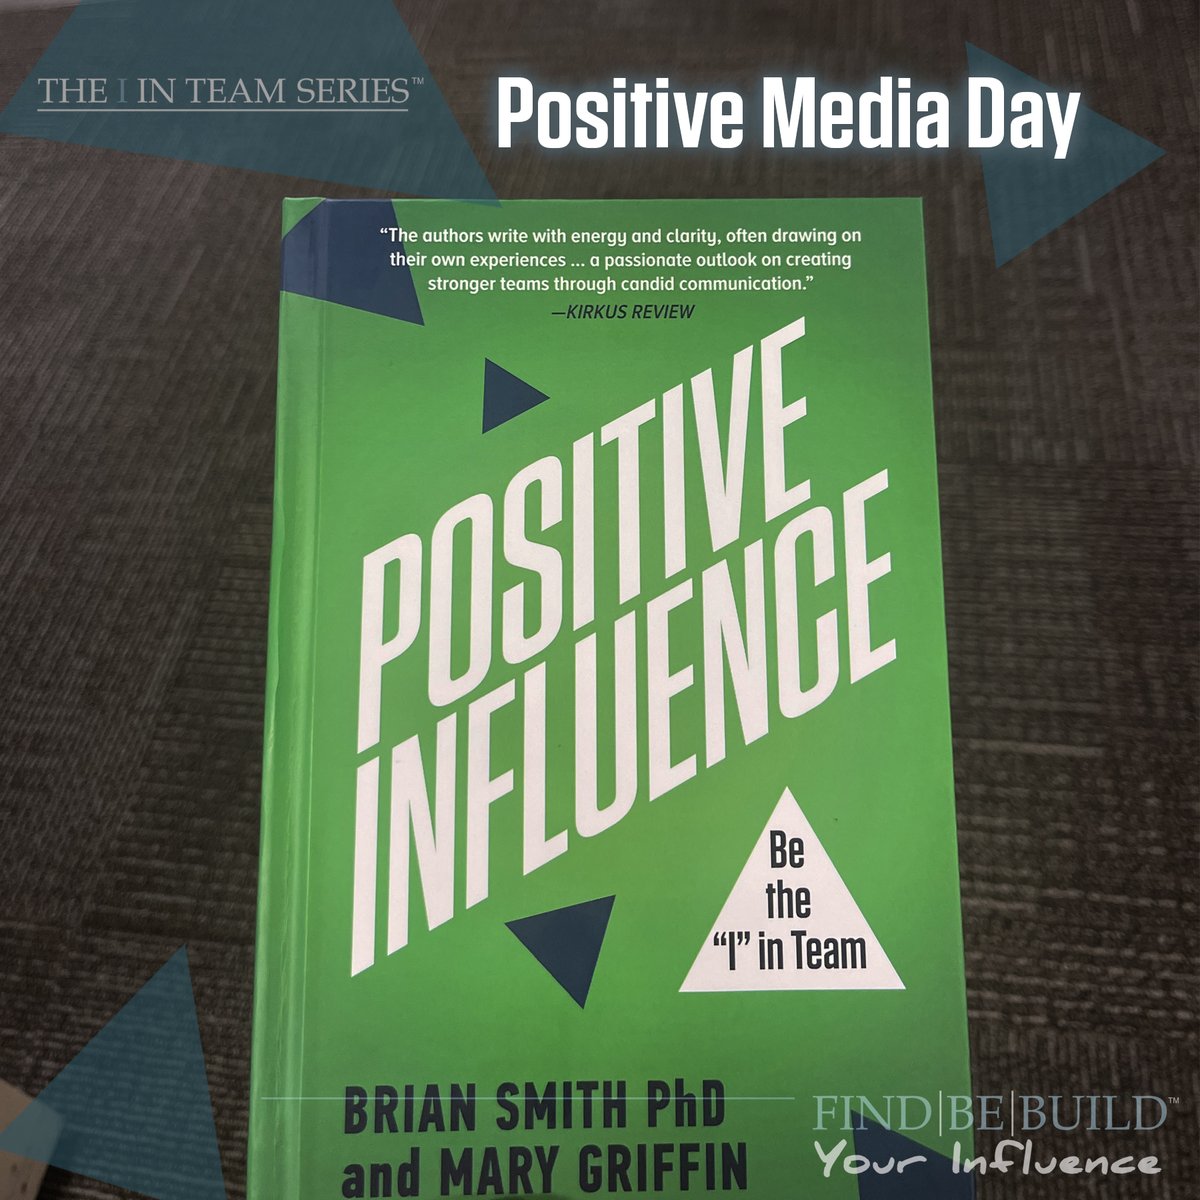 What better way to participate in Positive Media Day than by sharing your thoughts about our book, Positive Influence?!
#positivemedia #getyourcopy #book #amazonbook #positiveinfluence #inspiringchange #leadershipdevelopment #teamworkmakesthedreamwork #selfimprovement